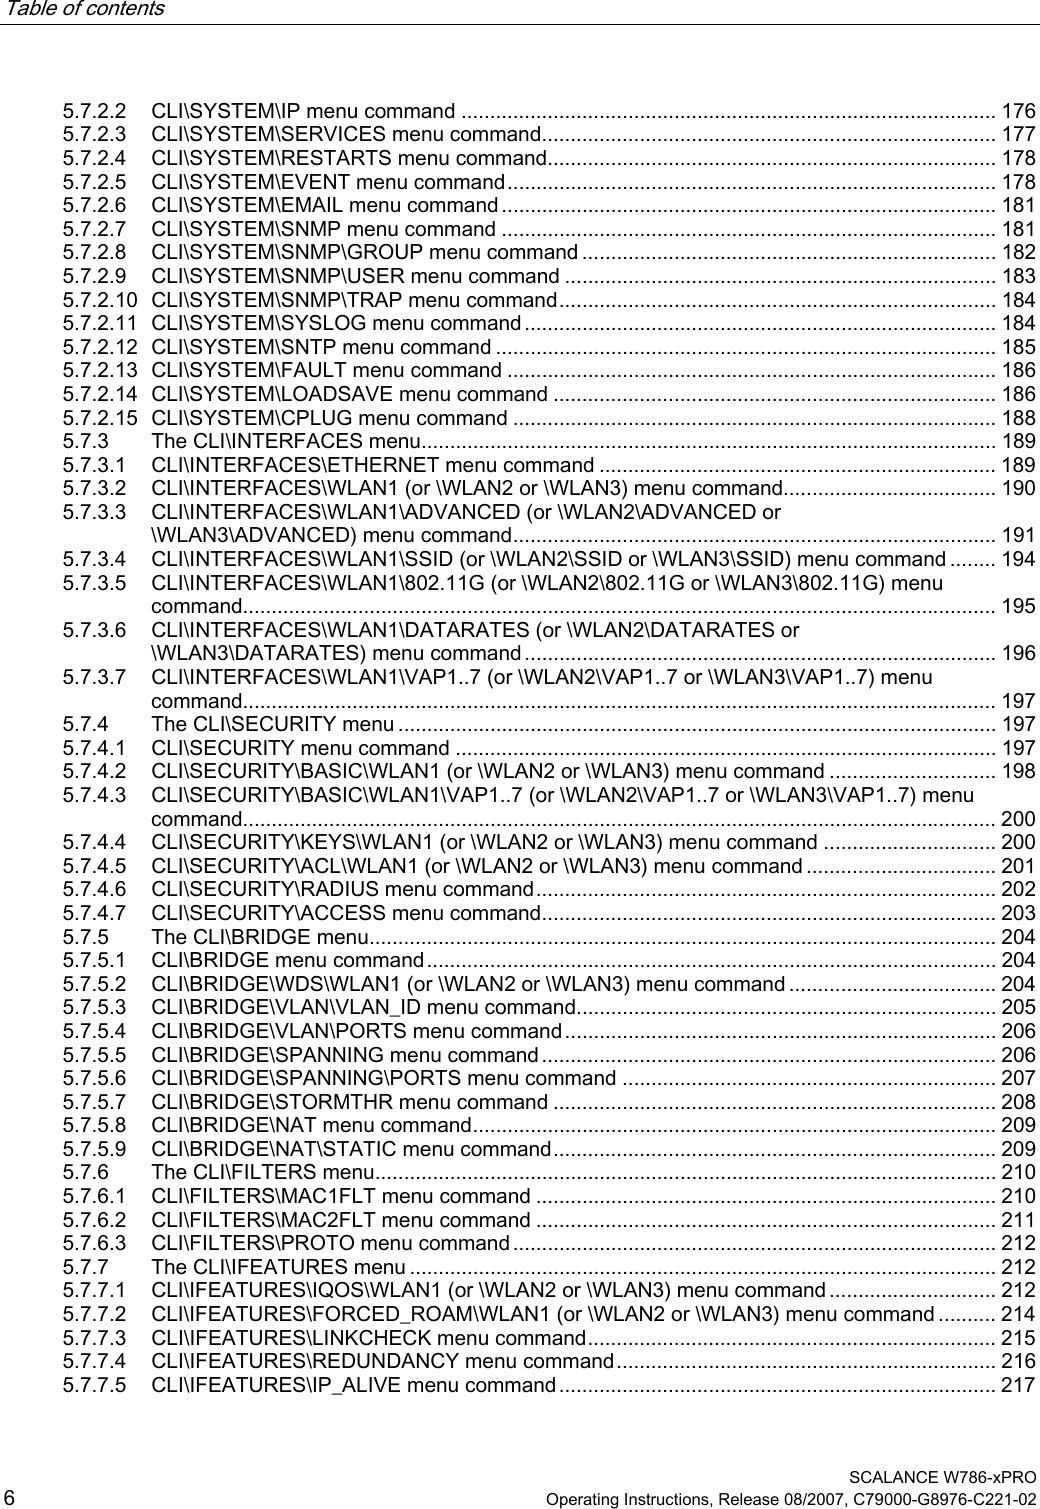 Table of contents      SCALANCE W786-xPRO 6  Operating Instructions, Release 08/2007, C79000-G8976-C221-02 5.7.2.2 CLI\SYSTEM\IP menu command ............................................................................................. 176 5.7.2.3 CLI\SYSTEM\SERVICES menu command............................................................................... 177 5.7.2.4 CLI\SYSTEM\RESTARTS menu command.............................................................................. 178 5.7.2.5 CLI\SYSTEM\EVENT menu command..................................................................................... 178 5.7.2.6 CLI\SYSTEM\EMAIL menu command ...................................................................................... 181 5.7.2.7 CLI\SYSTEM\SNMP menu command ...................................................................................... 181 5.7.2.8 CLI\SYSTEM\SNMP\GROUP menu command ........................................................................ 182 5.7.2.9 CLI\SYSTEM\SNMP\USER menu command ........................................................................... 183 5.7.2.10 CLI\SYSTEM\SNMP\TRAP menu command............................................................................ 184 5.7.2.11 CLI\SYSTEM\SYSLOG menu command.................................................................................. 184 5.7.2.12 CLI\SYSTEM\SNTP menu command ....................................................................................... 185 5.7.2.13 CLI\SYSTEM\FAULT menu command ..................................................................................... 186 5.7.2.14 CLI\SYSTEM\LOADSAVE menu command ............................................................................. 186 5.7.2.15 CLI\SYSTEM\CPLUG menu command .................................................................................... 188 5.7.3 The CLI\INTERFACES menu.................................................................................................... 189 5.7.3.1 CLI\INTERFACES\ETHERNET menu command ..................................................................... 189 5.7.3.2 CLI\INTERFACES\WLAN1 (or \WLAN2 or \WLAN3) menu command..................................... 190 5.7.3.3 CLI\INTERFACES\WLAN1\ADVANCED (or \WLAN2\ADVANCED or \WLAN3\ADVANCED) menu command.................................................................................... 191 5.7.3.4 CLI\INTERFACES\WLAN1\SSID (or \WLAN2\SSID or \WLAN3\SSID) menu command ........ 194 5.7.3.5 CLI\INTERFACES\WLAN1\802.11G (or \WLAN2\802.11G or \WLAN3\802.11G) menu command................................................................................................................................... 195 5.7.3.6 CLI\INTERFACES\WLAN1\DATARATES (or \WLAN2\DATARATES or \WLAN3\DATARATES) menu command .................................................................................. 196 5.7.3.7 CLI\INTERFACES\WLAN1\VAP1..7 (or \WLAN2\VAP1..7 or \WLAN3\VAP1..7) menu command................................................................................................................................... 197 5.7.4 The CLI\SECURITY menu ........................................................................................................ 197 5.7.4.1 CLI\SECURITY menu command .............................................................................................. 197 5.7.4.2 CLI\SECURITY\BASIC\WLAN1 (or \WLAN2 or \WLAN3) menu command ............................. 198 5.7.4.3 CLI\SECURITY\BASIC\WLAN1\VAP1..7 (or \WLAN2\VAP1..7 or \WLAN3\VAP1..7) menu command................................................................................................................................... 200 5.7.4.4 CLI\SECURITY\KEYS\WLAN1 (or \WLAN2 or \WLAN3) menu command .............................. 200 5.7.4.5 CLI\SECURITY\ACL\WLAN1 (or \WLAN2 or \WLAN3) menu command ................................. 201 5.7.4.6 CLI\SECURITY\RADIUS menu command................................................................................ 202 5.7.4.7 CLI\SECURITY\ACCESS menu command............................................................................... 203 5.7.5 The CLI\BRIDGE menu............................................................................................................. 204 5.7.5.1 CLI\BRIDGE menu command................................................................................................... 204 5.7.5.2 CLI\BRIDGE\WDS\WLAN1 (or \WLAN2 or \WLAN3) menu command .................................... 204 5.7.5.3 CLI\BRIDGE\VLAN\VLAN_ID menu command......................................................................... 205 5.7.5.4 CLI\BRIDGE\VLAN\PORTS menu command........................................................................... 206 5.7.5.5 CLI\BRIDGE\SPANNING menu command............................................................................... 206 5.7.5.6 CLI\BRIDGE\SPANNING\PORTS menu command ................................................................. 207 5.7.5.7 CLI\BRIDGE\STORMTHR menu command ............................................................................. 208 5.7.5.8 CLI\BRIDGE\NAT menu command........................................................................................... 209 5.7.5.9 CLI\BRIDGE\NAT\STATIC menu command............................................................................. 209 5.7.6 The CLI\FILTERS menu............................................................................................................ 210 5.7.6.1 CLI\FILTERS\MAC1FLT menu command ................................................................................ 210 5.7.6.2 CLI\FILTERS\MAC2FLT menu command ................................................................................ 211 5.7.6.3 CLI\FILTERS\PROTO menu command .................................................................................... 212 5.7.7 The CLI\IFEATURES menu ...................................................................................................... 212 5.7.7.1 CLI\IFEATURES\IQOS\WLAN1 (or \WLAN2 or \WLAN3) menu command ............................. 212 5.7.7.2 CLI\IFEATURES\FORCED_ROAM\WLAN1 (or \WLAN2 or \WLAN3) menu command .......... 214 5.7.7.3 CLI\IFEATURES\LINKCHECK menu command....................................................................... 215 5.7.7.4 CLI\IFEATURES\REDUNDANCY menu command.................................................................. 216 5.7.7.5 CLI\IFEATURES\IP_ALIVE menu command............................................................................ 217 